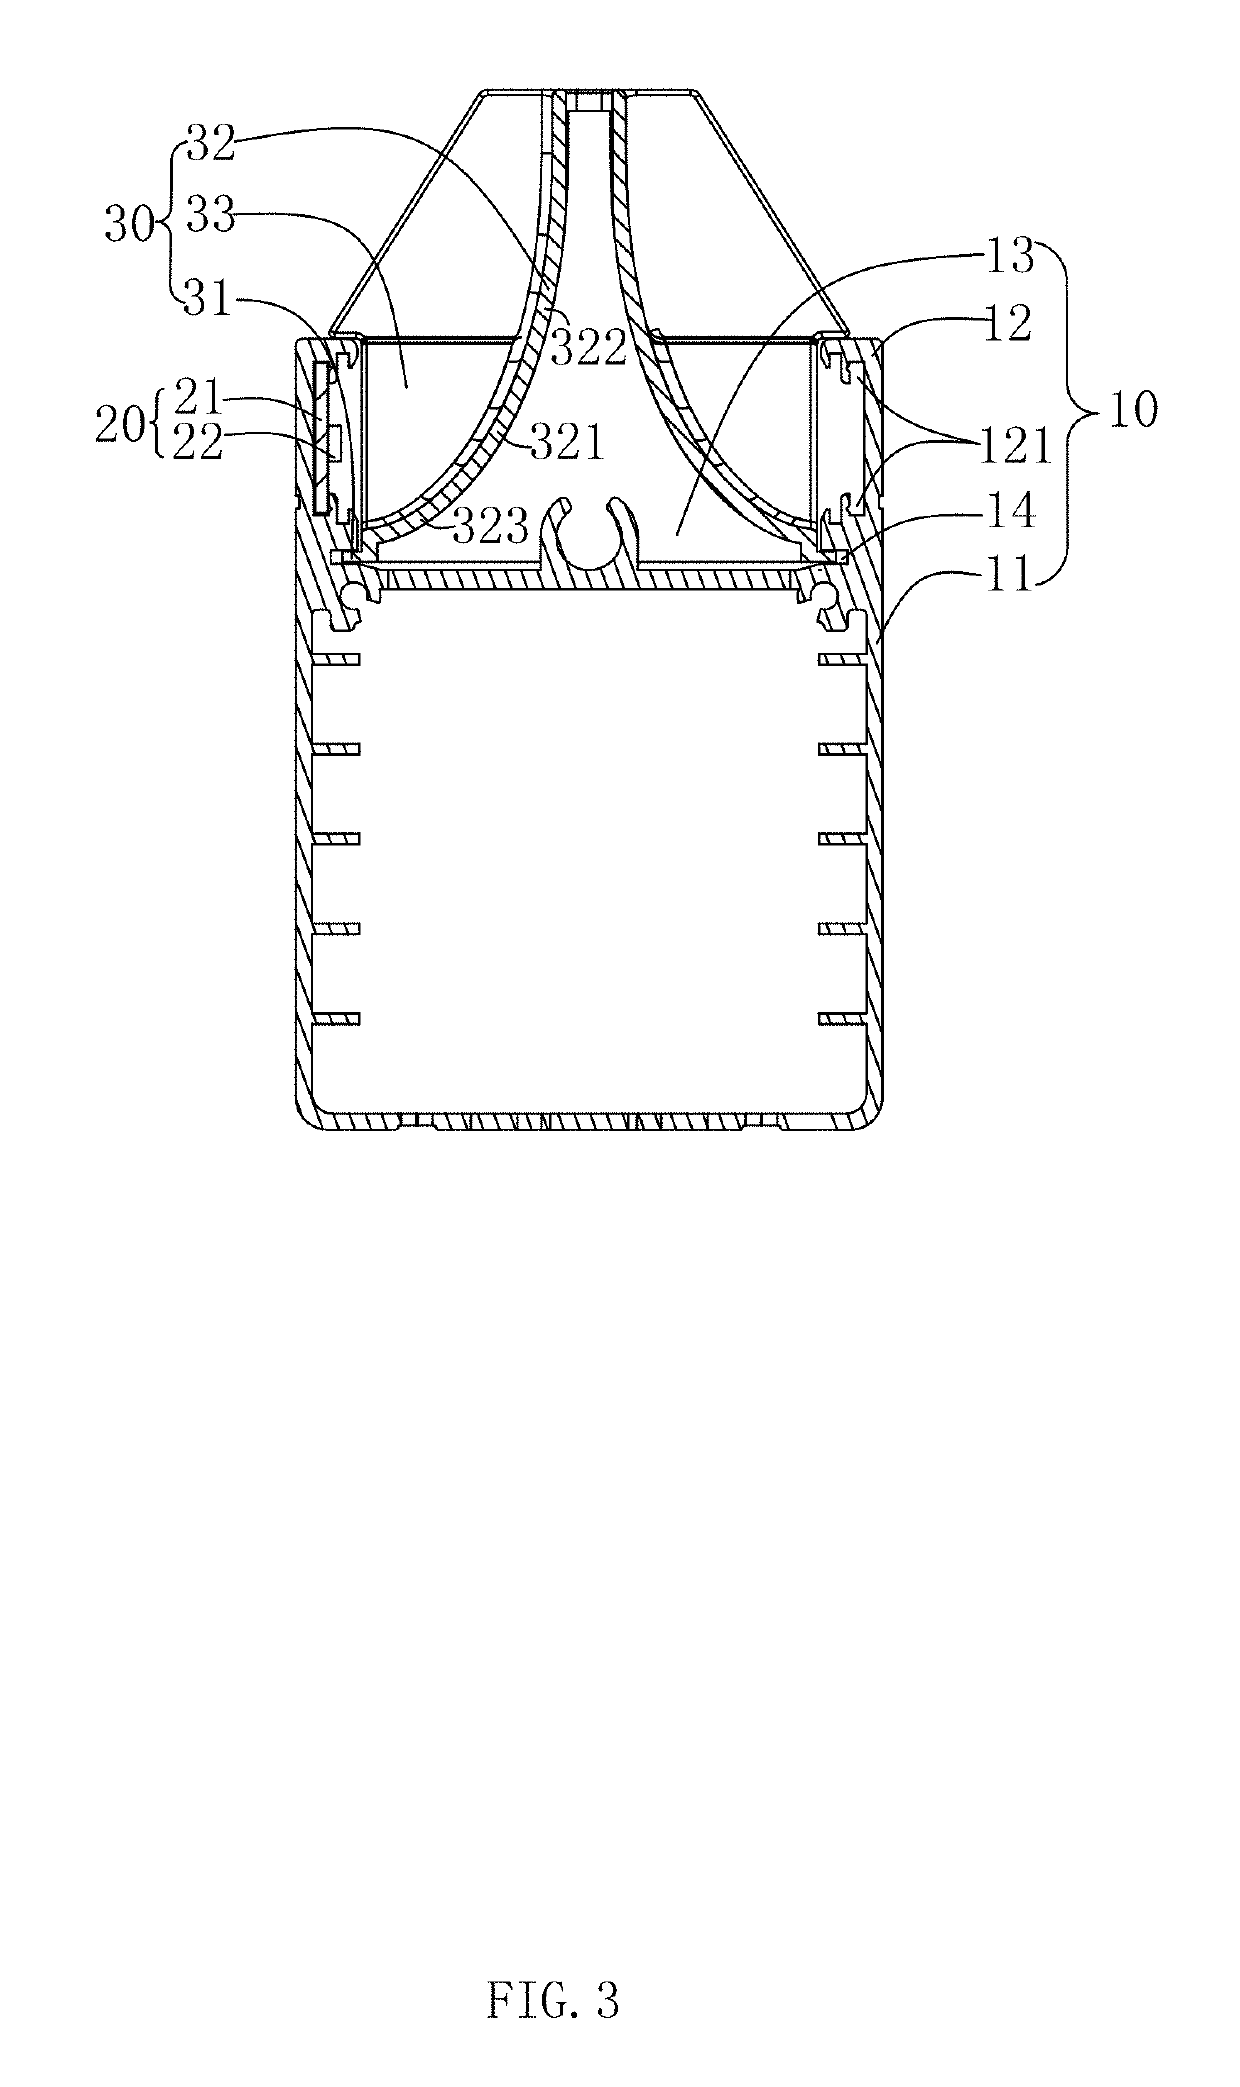 LED strip lamp light distributing system having a light source module and a reflective device with various curvatures for illuminating different sections of an illuminated surface